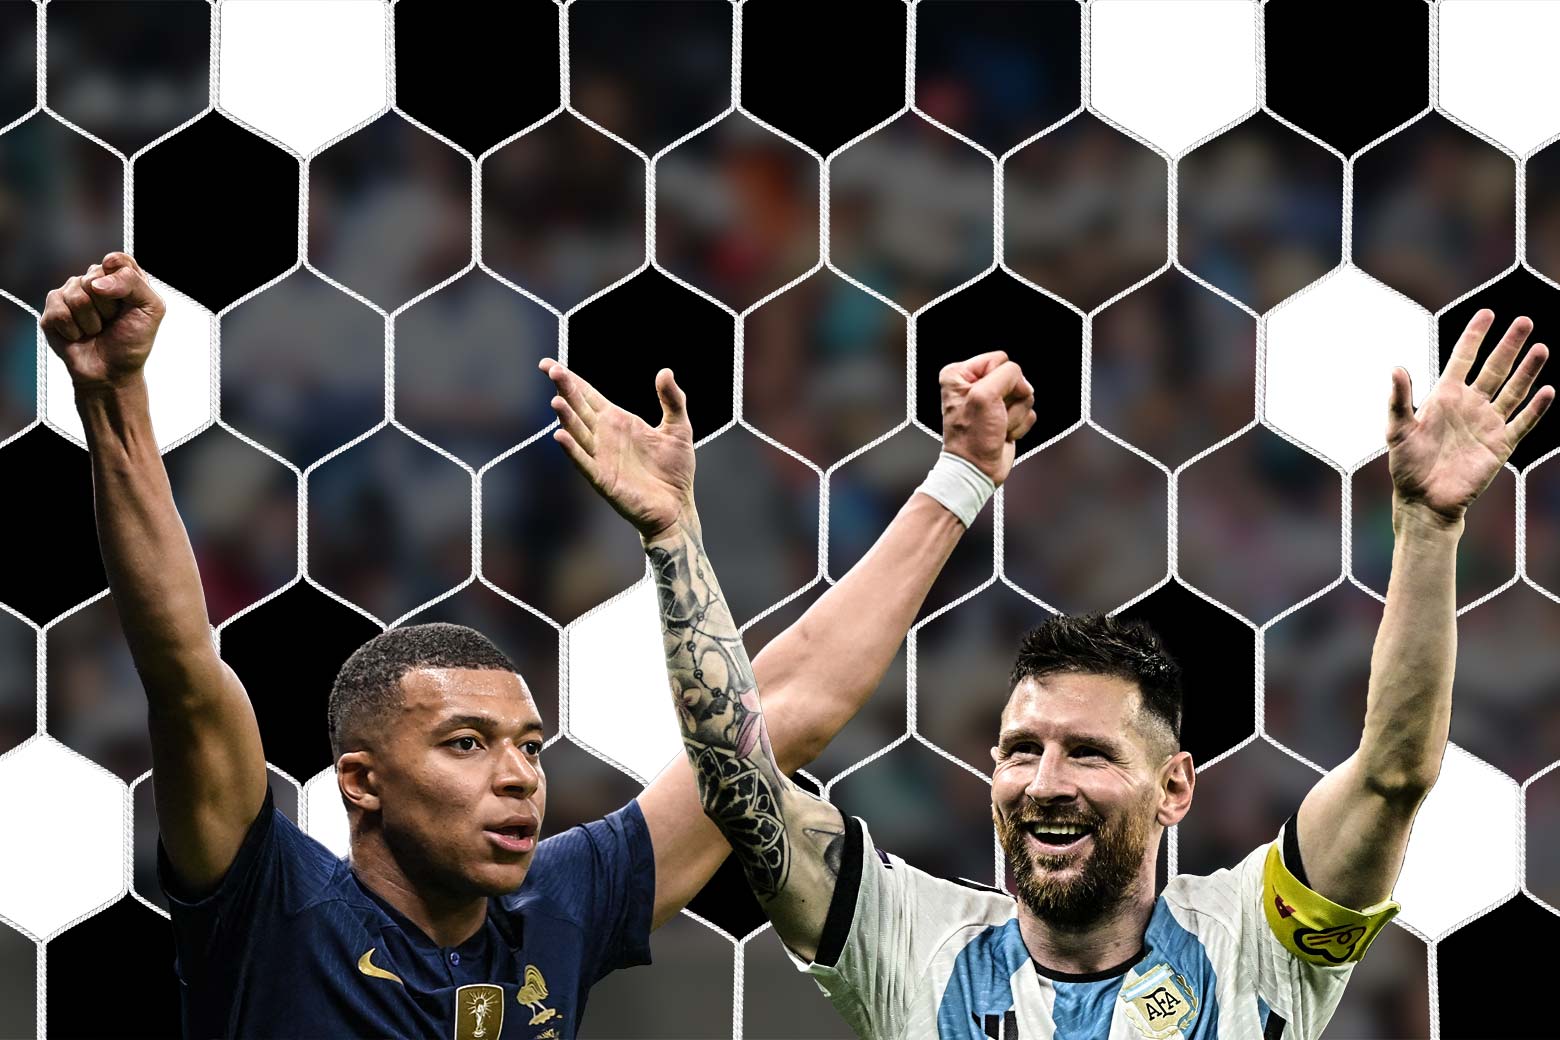 Kylian Mbappé and Lionel Messi celebrate with both their arms raised, a soccer-net scrim illustrated behind them